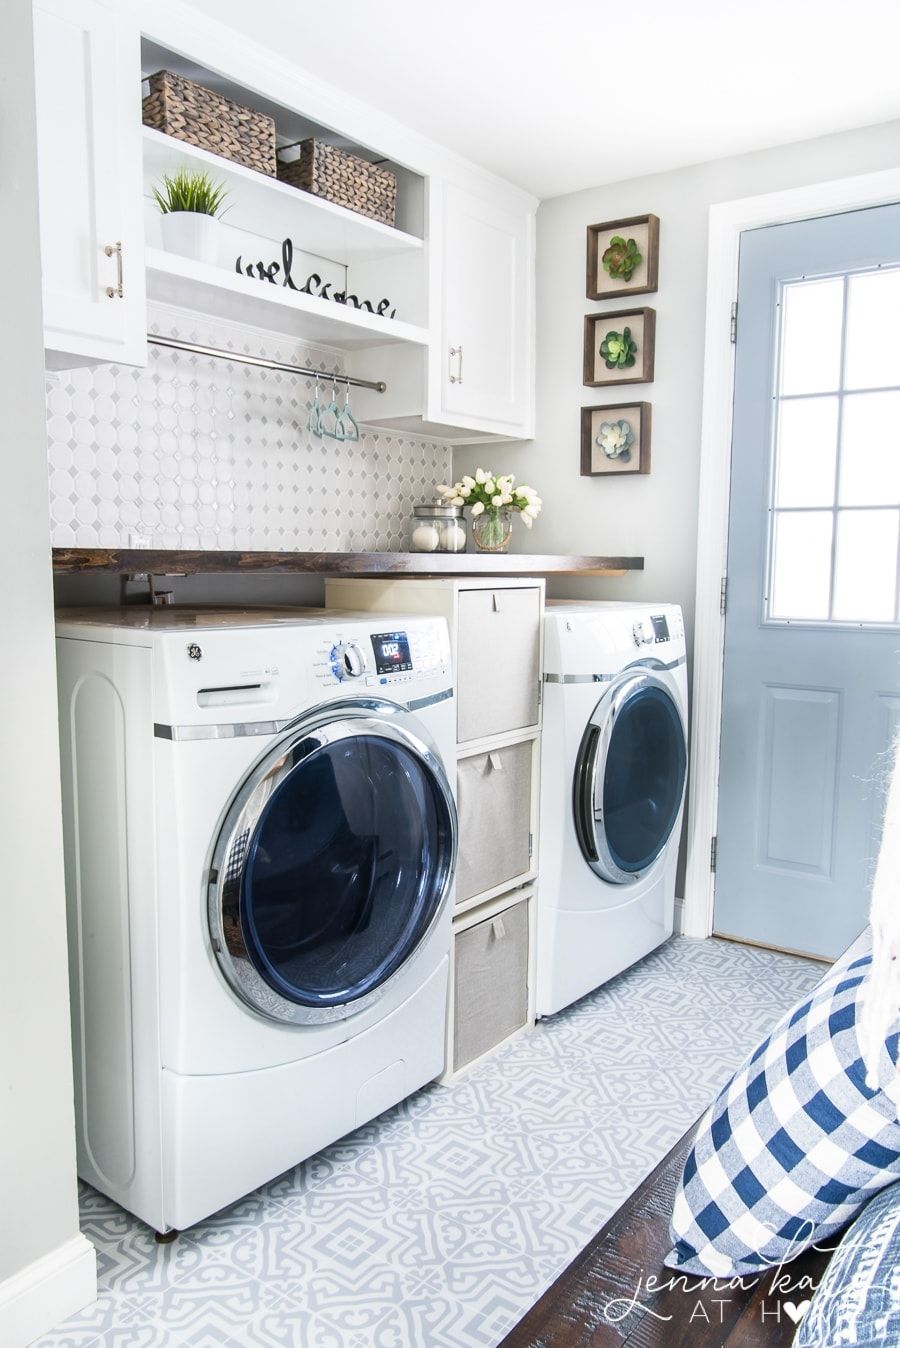 Laundry and Utility Room Organization